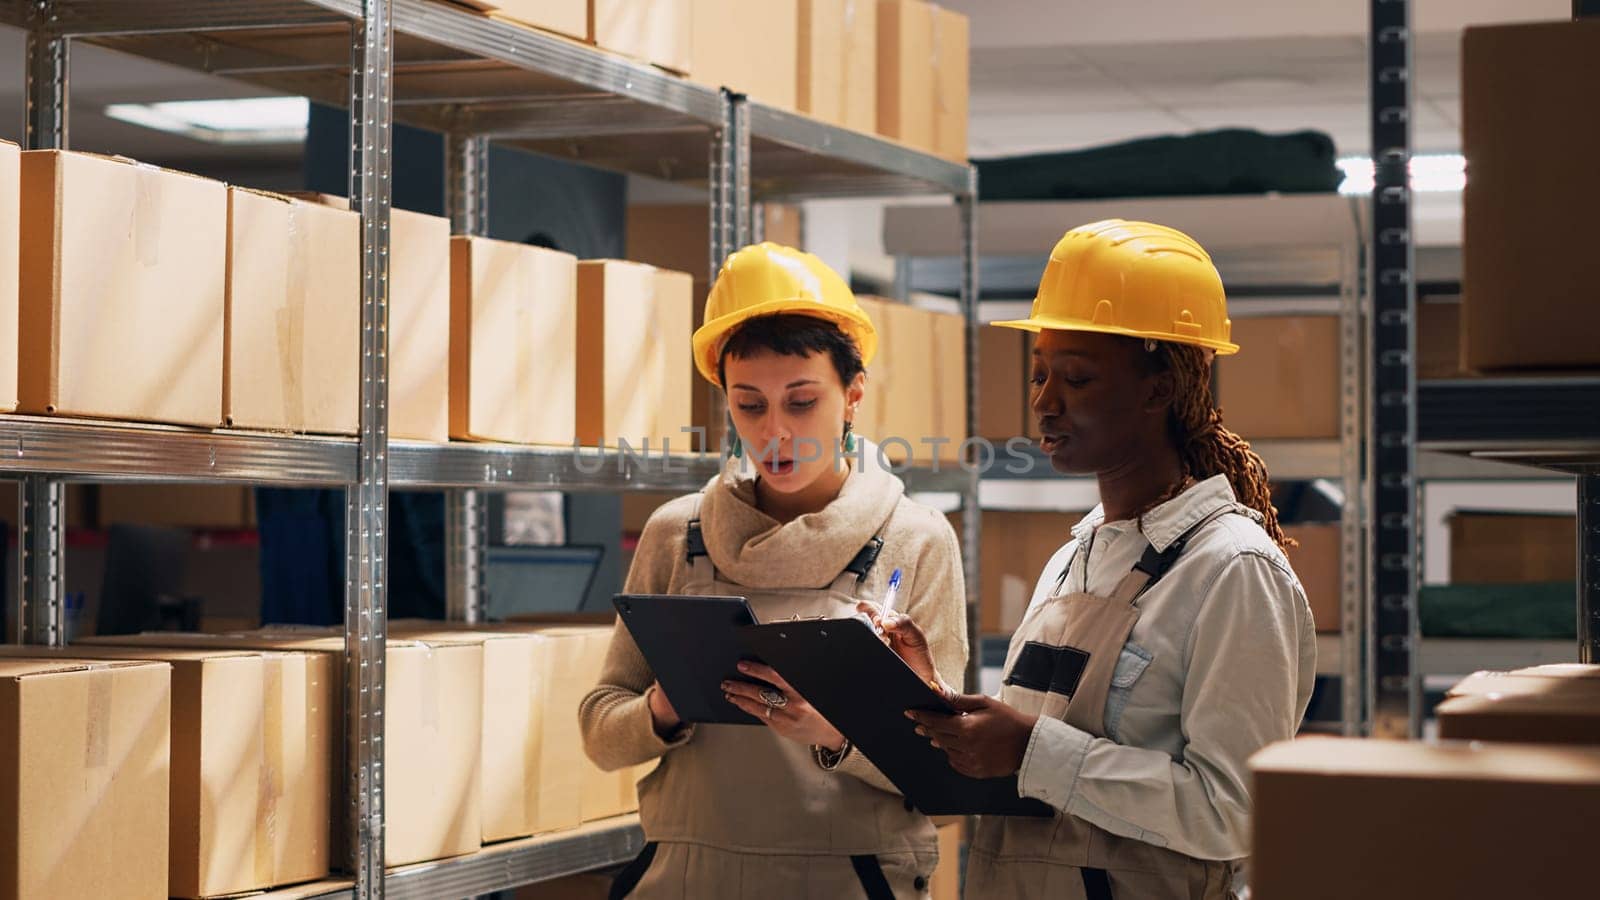 Diverse employees counting boxes of products placed on storehouse shelves, looking at merchandise goods in cardboard packages. Two people in overalls working with cargo in warehouse depot.